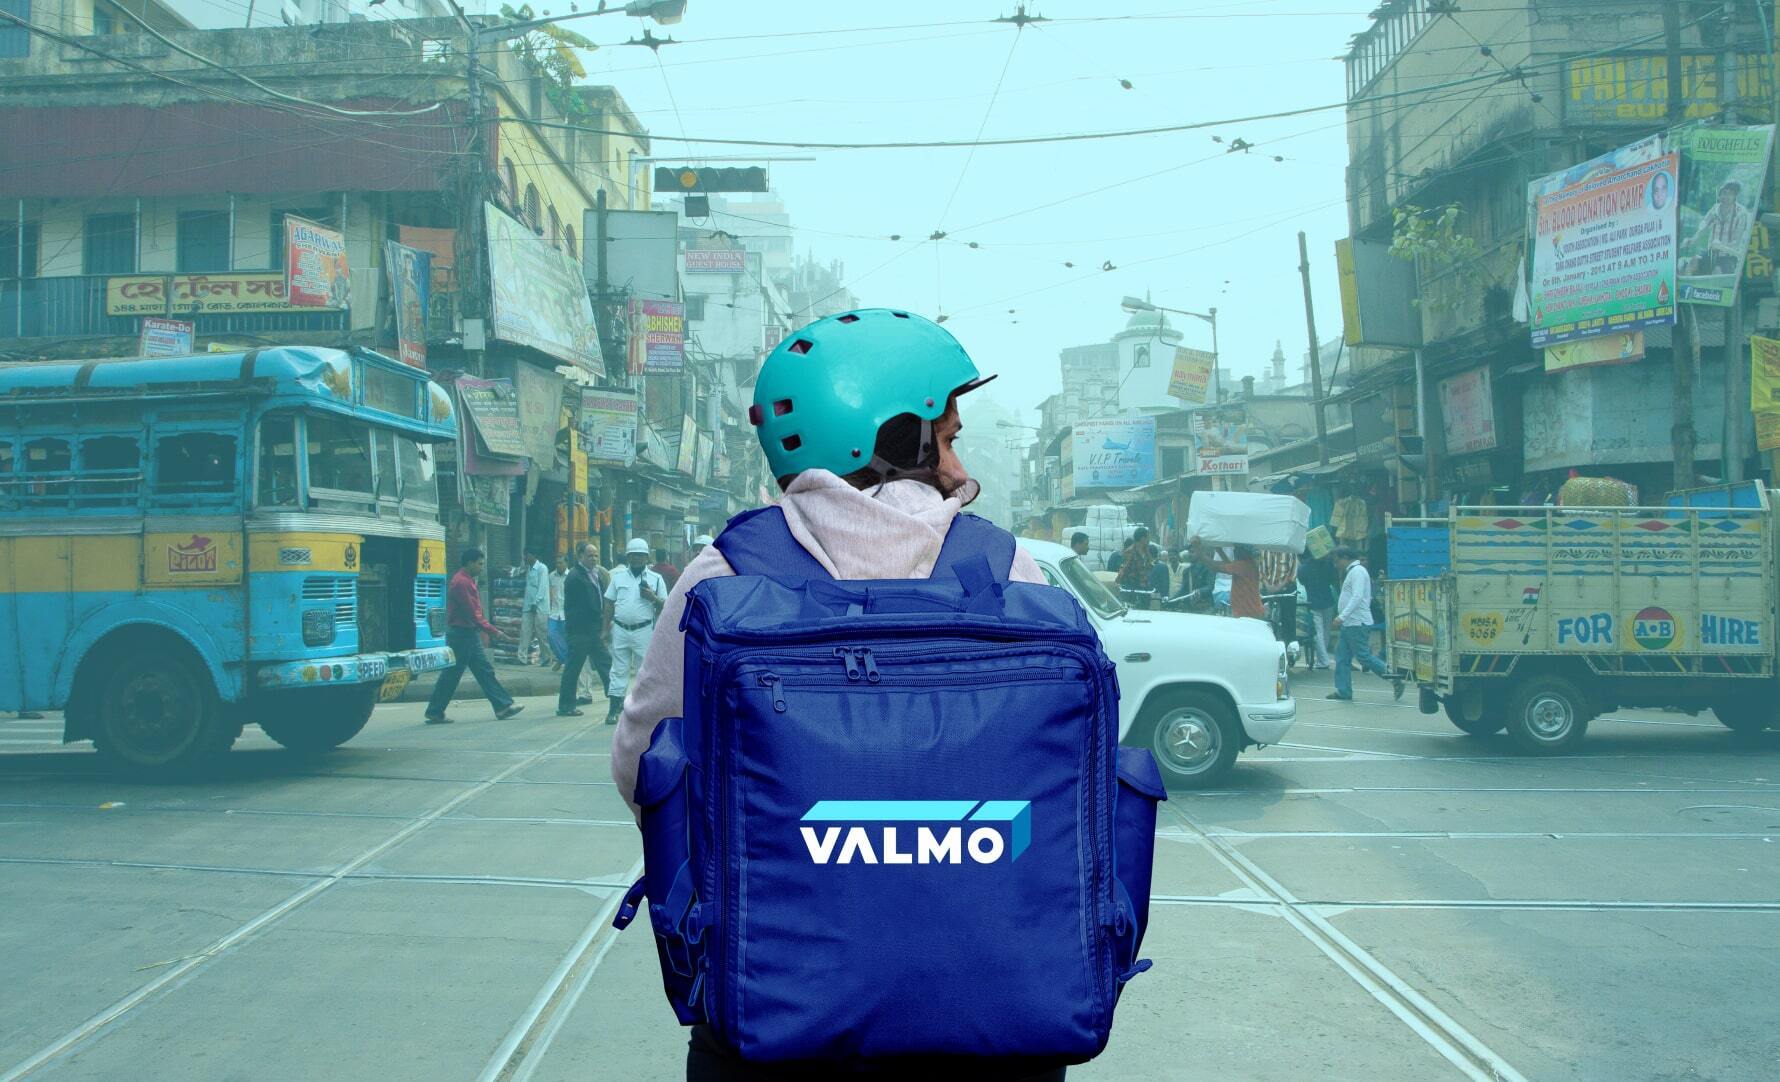 A Valmo delivery boy moving across street of India.